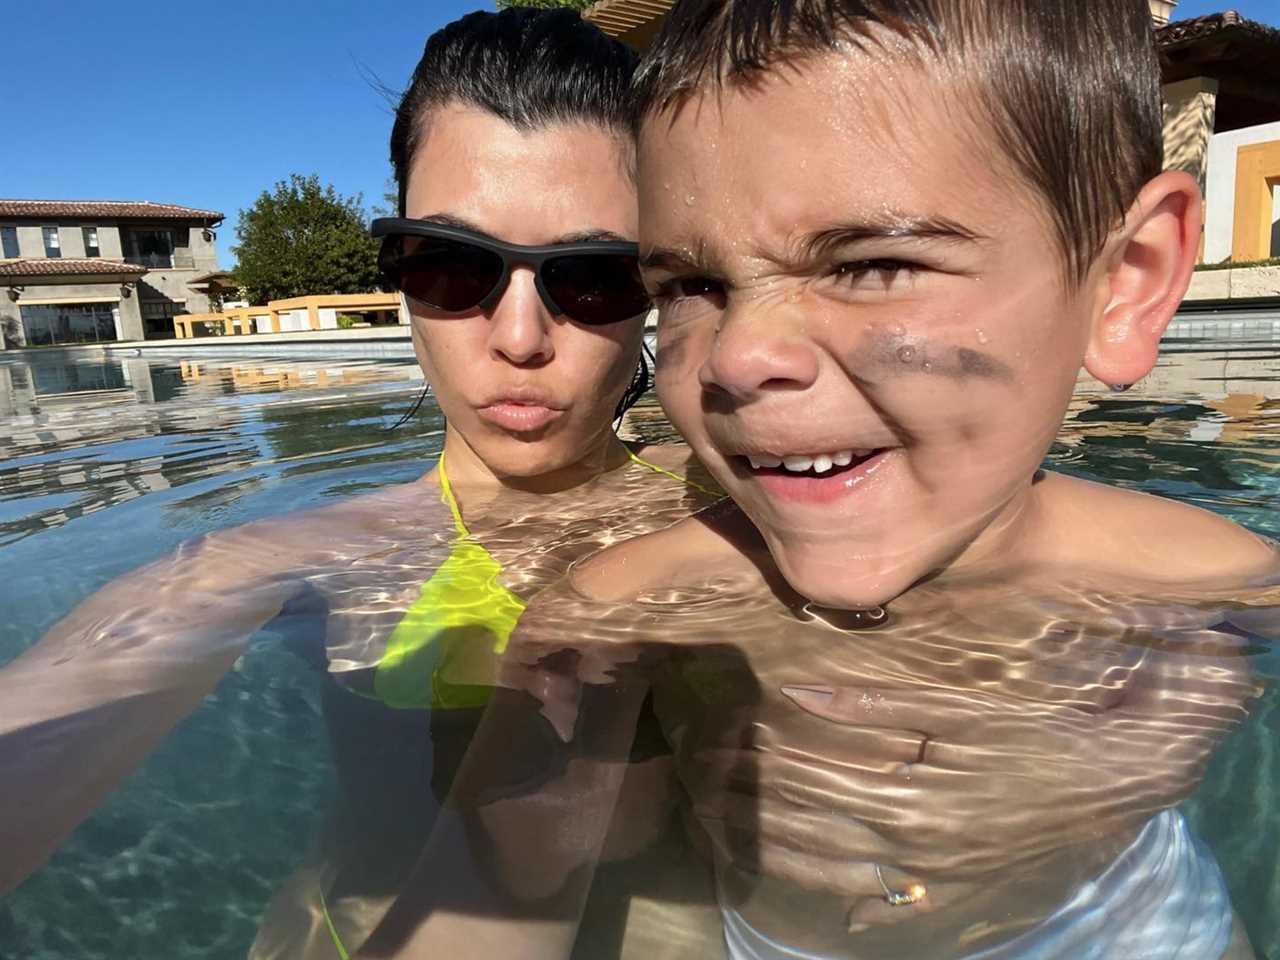 Kourtney Kardashian slammed for ‘deplorable’ treatment of son Reign, 8, in new pics after revealing his hair makeover